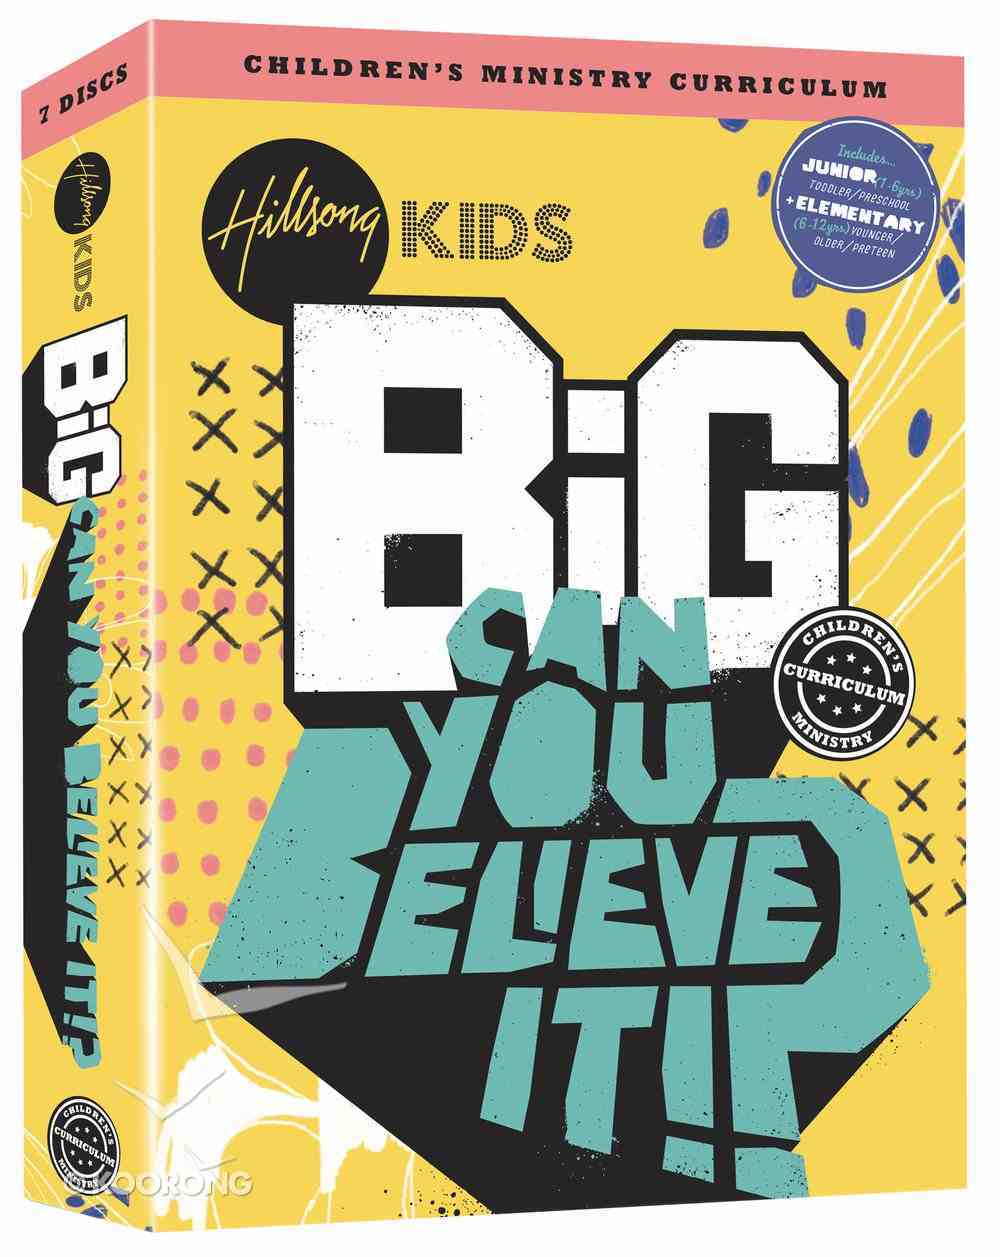 Can You Believe It!? (Hillsong Kids Big Curriculum Series) Pack